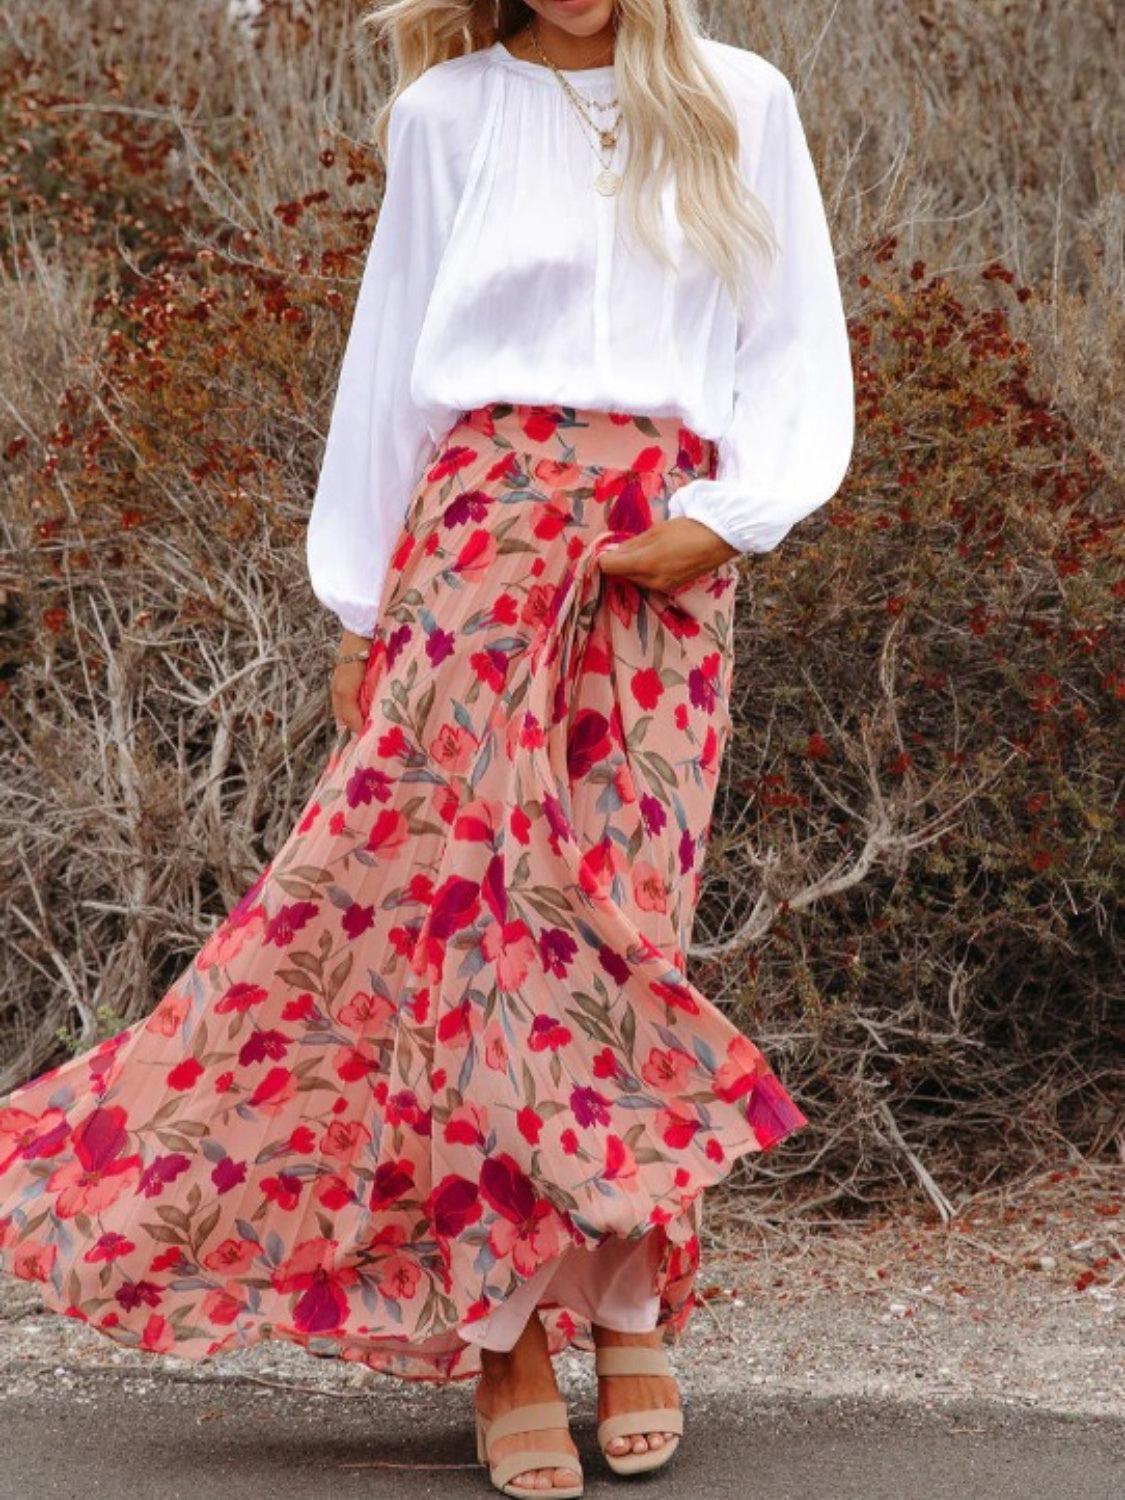 a woman wearing a white shirt and pink floral skirt